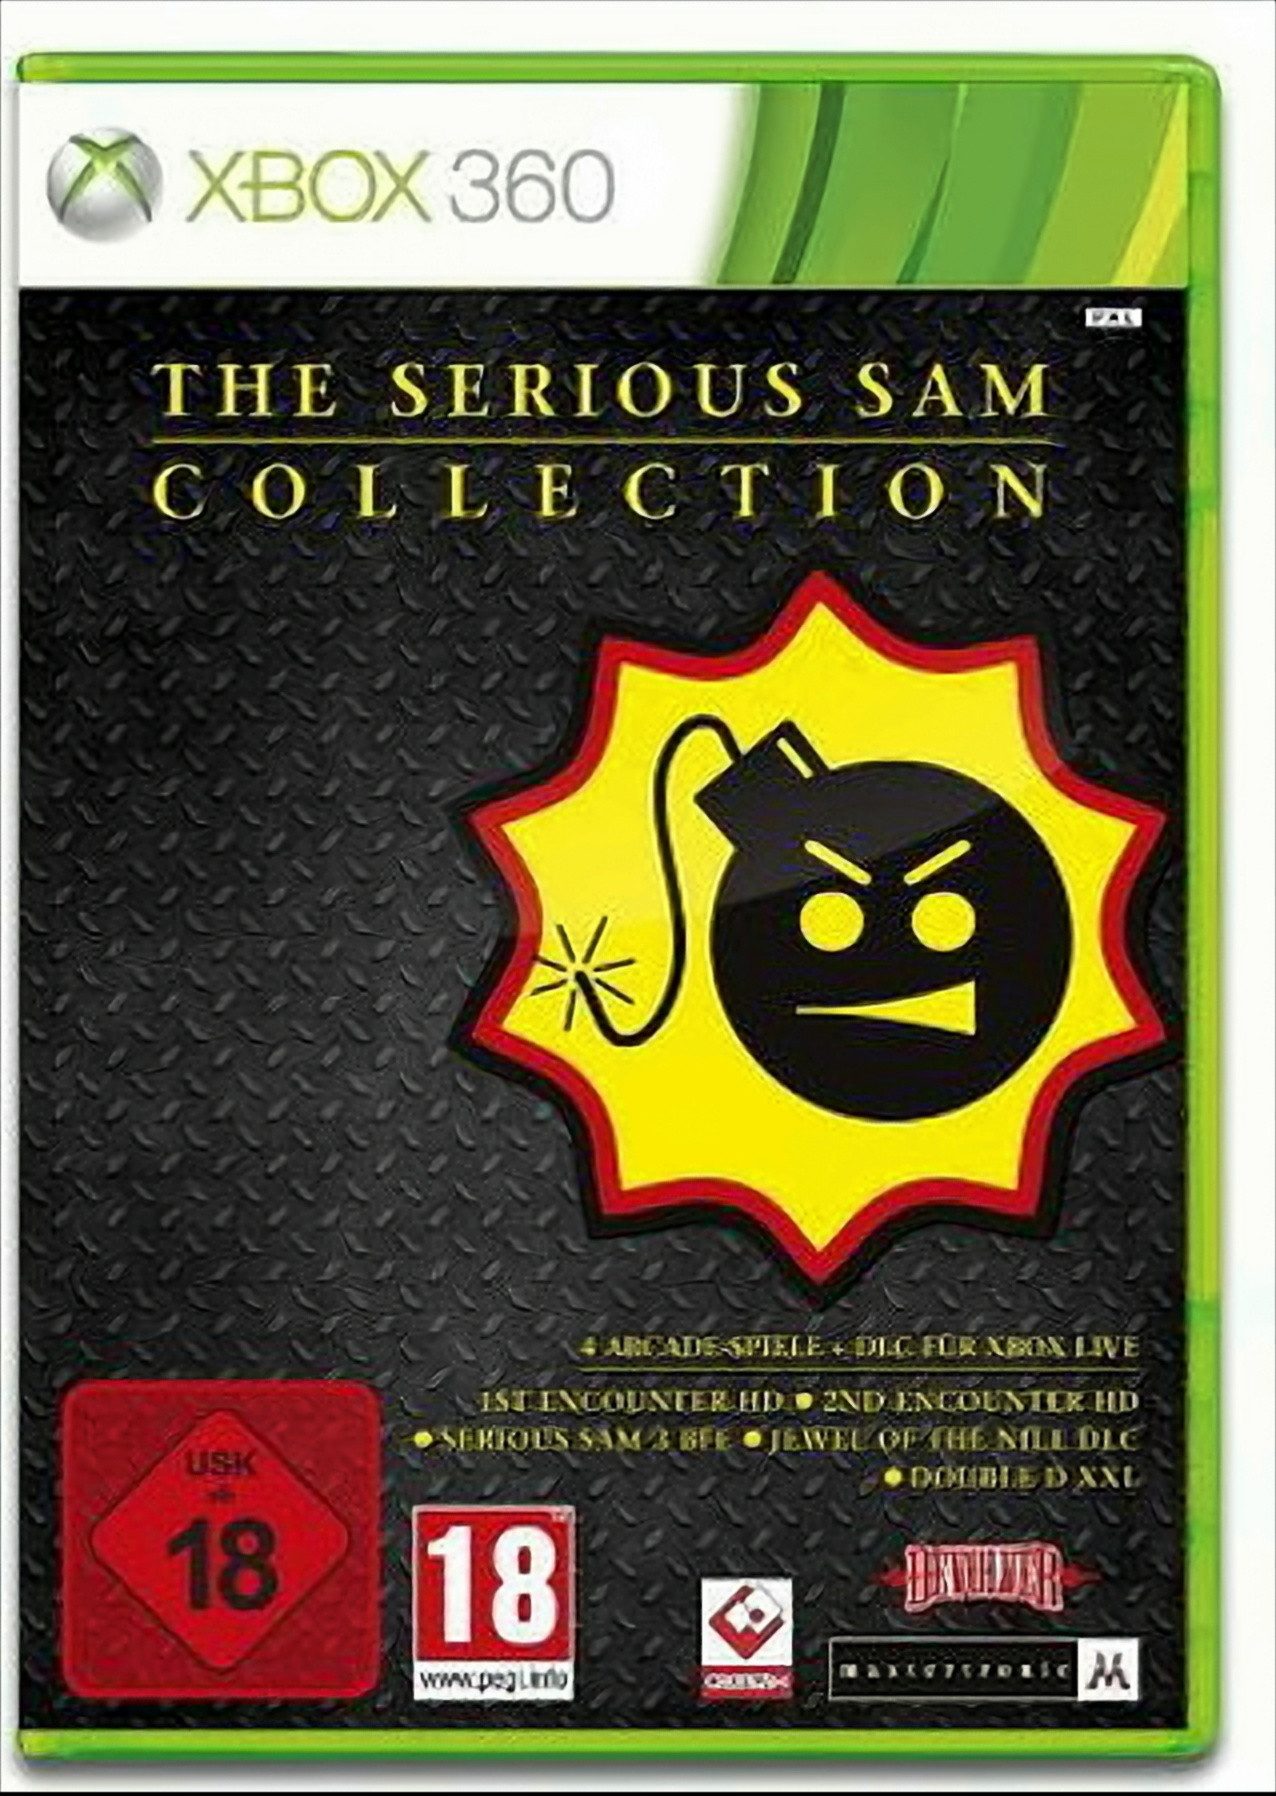 The Serious Sam Collection Xbox 360